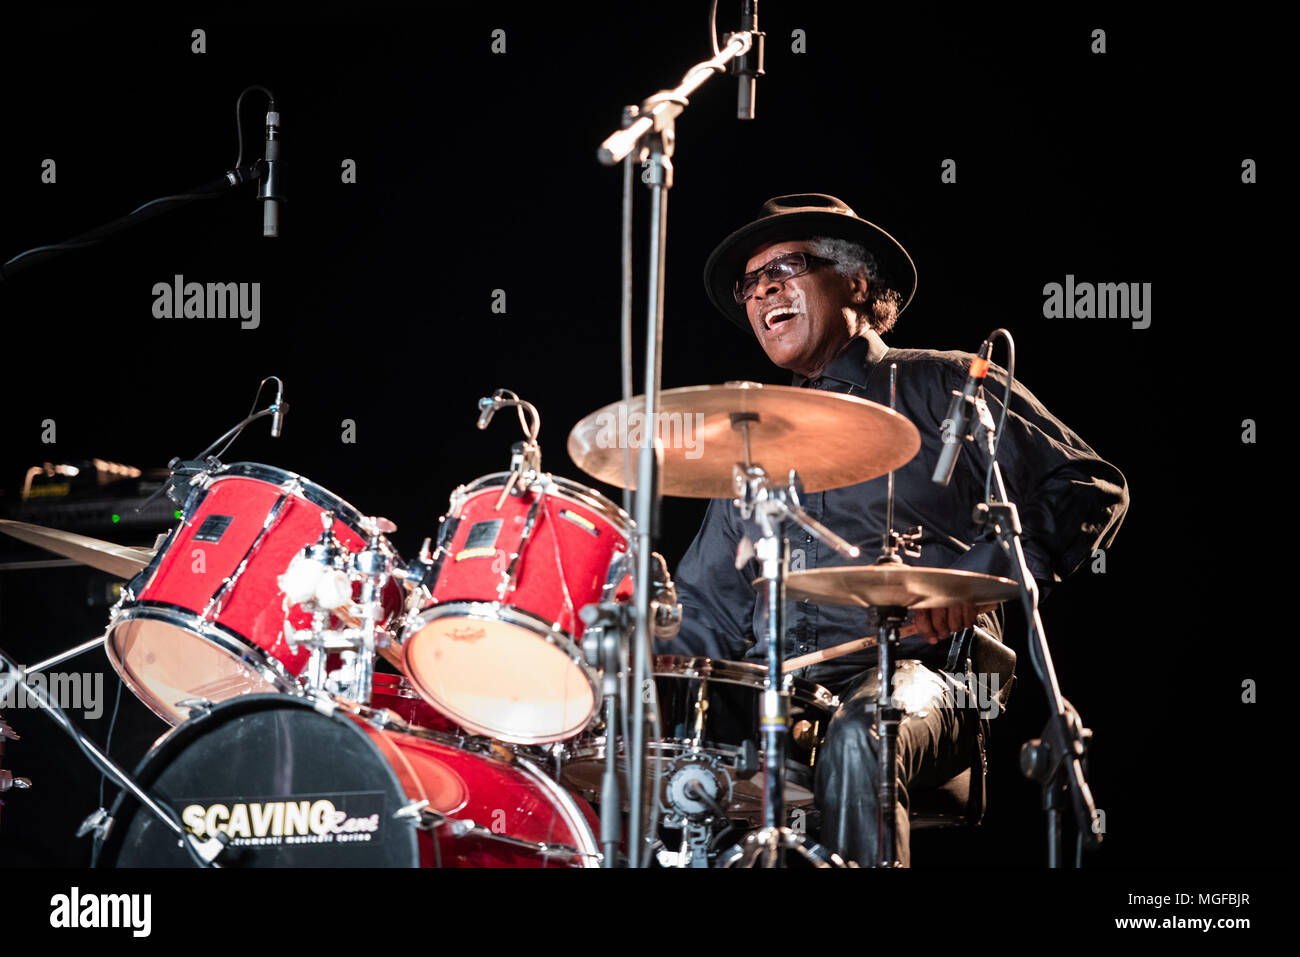 Italy, 2018 April 26th: The American saxophonist Archie Shepp performing live on stage at the Officine Grandi Riparazioni in Torino together with Carl Stock Photo